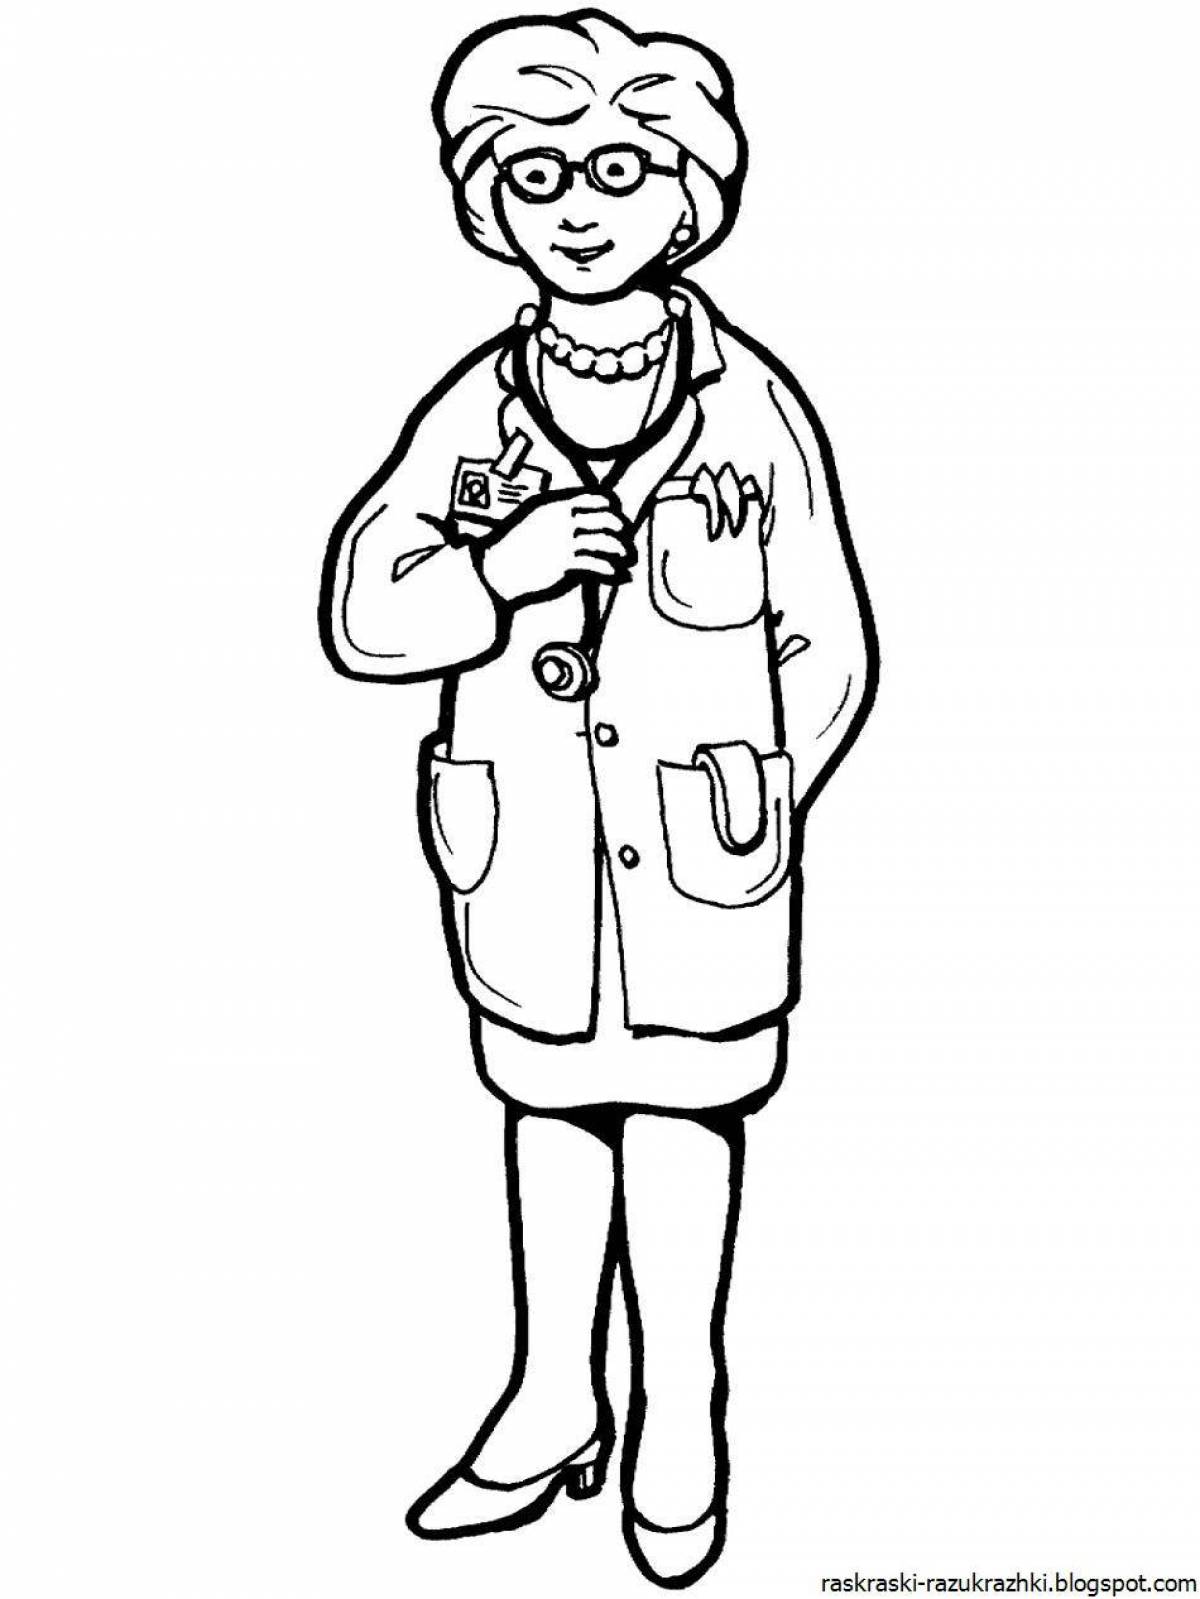 Colorful doctor coloring pages for kids